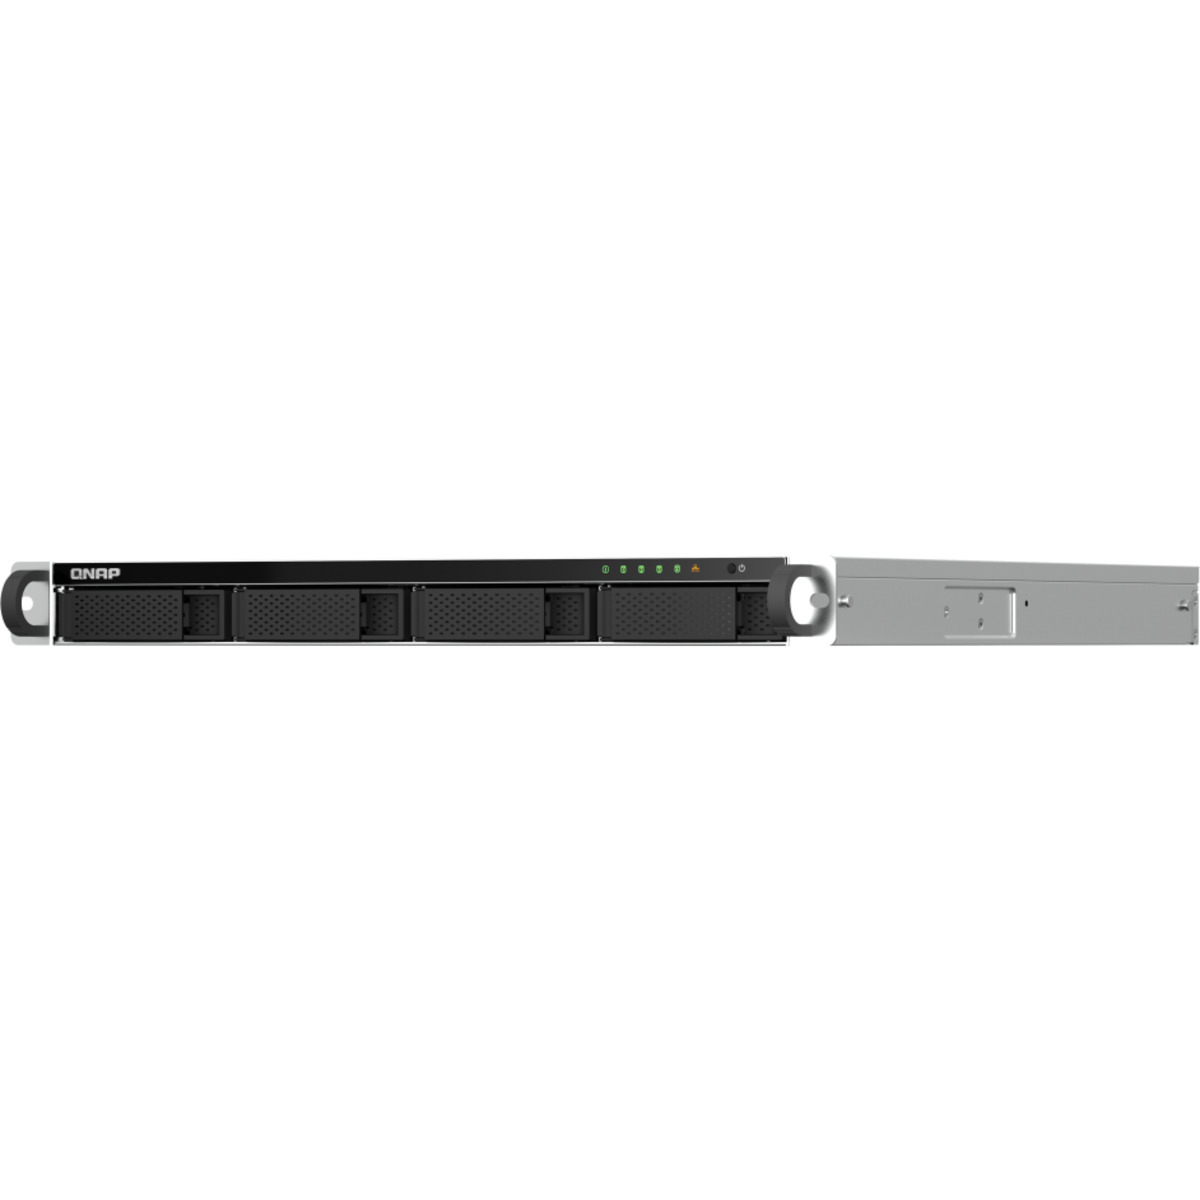 QNAP TS-464U 42tb 4-Bay RackMount Multimedia / Power User / Business NAS - Network Attached Storage Device 3x14tb Seagate IronWolf Pro ST14000NT001 3.5 7200rpm SATA 6Gb/s HDD NAS Class Drives Installed - Burn-In Tested TS-464U